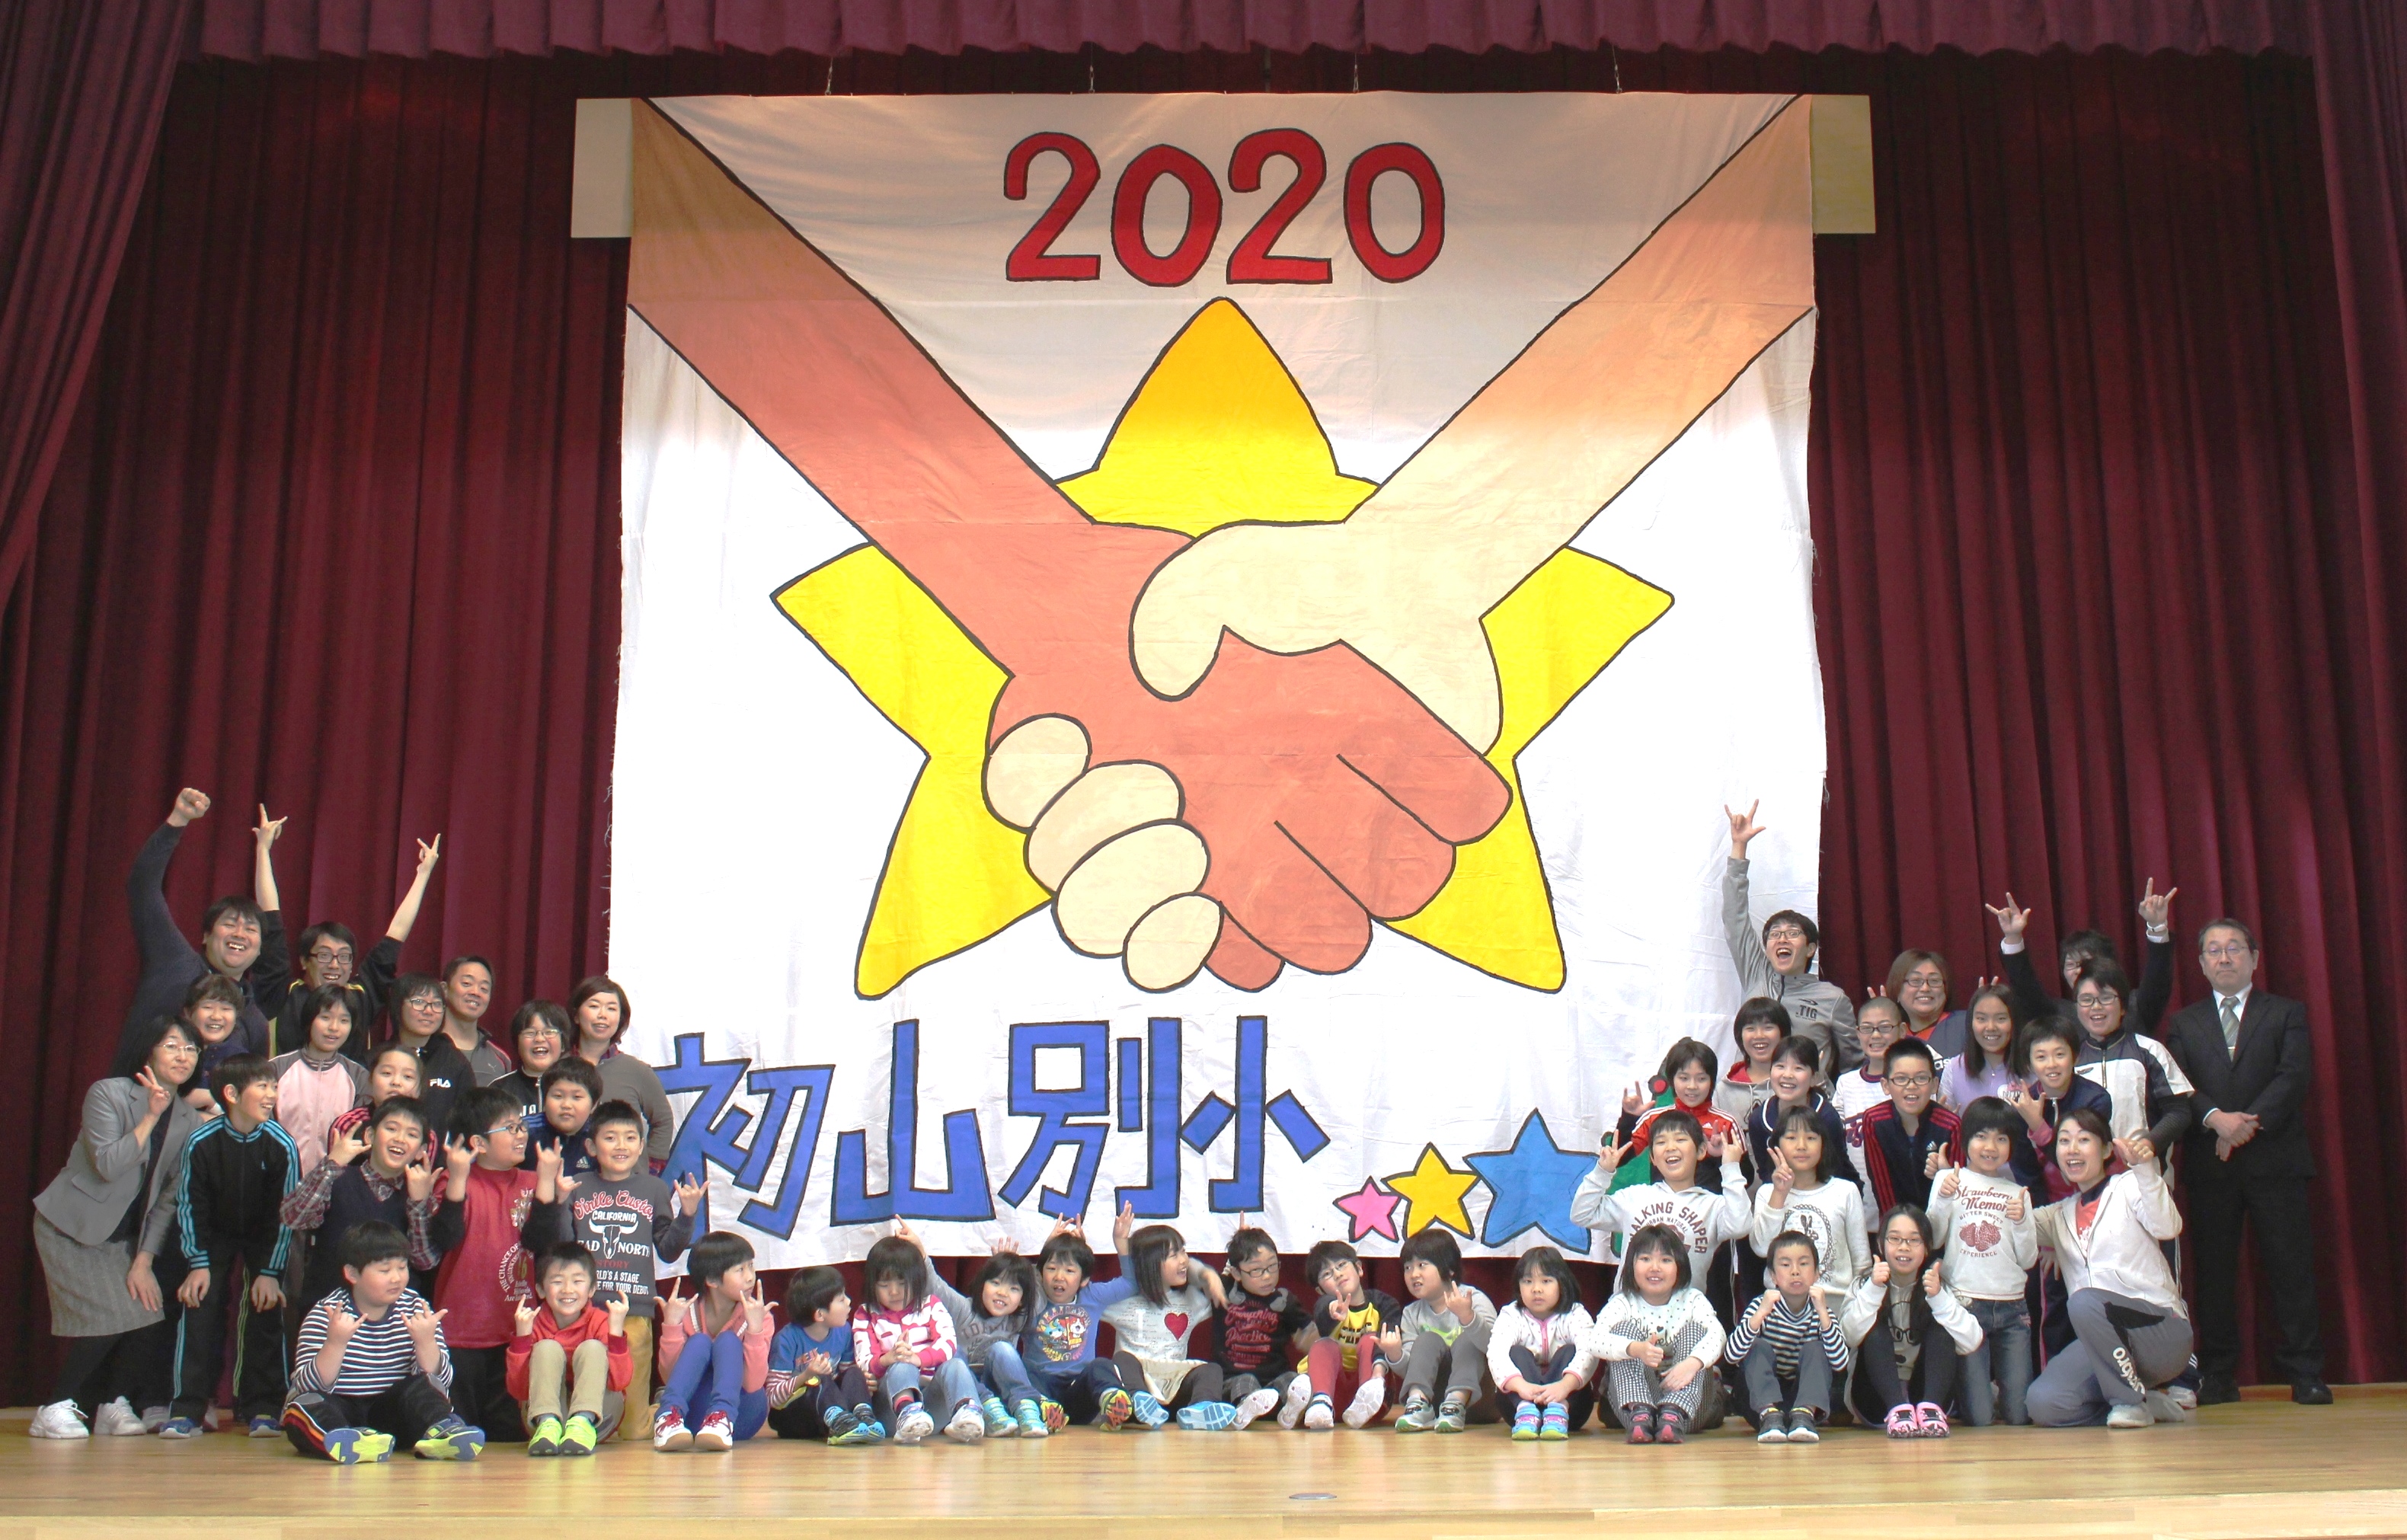 The Biggest Painting in the World 2020 Shosanbetsumura was completed